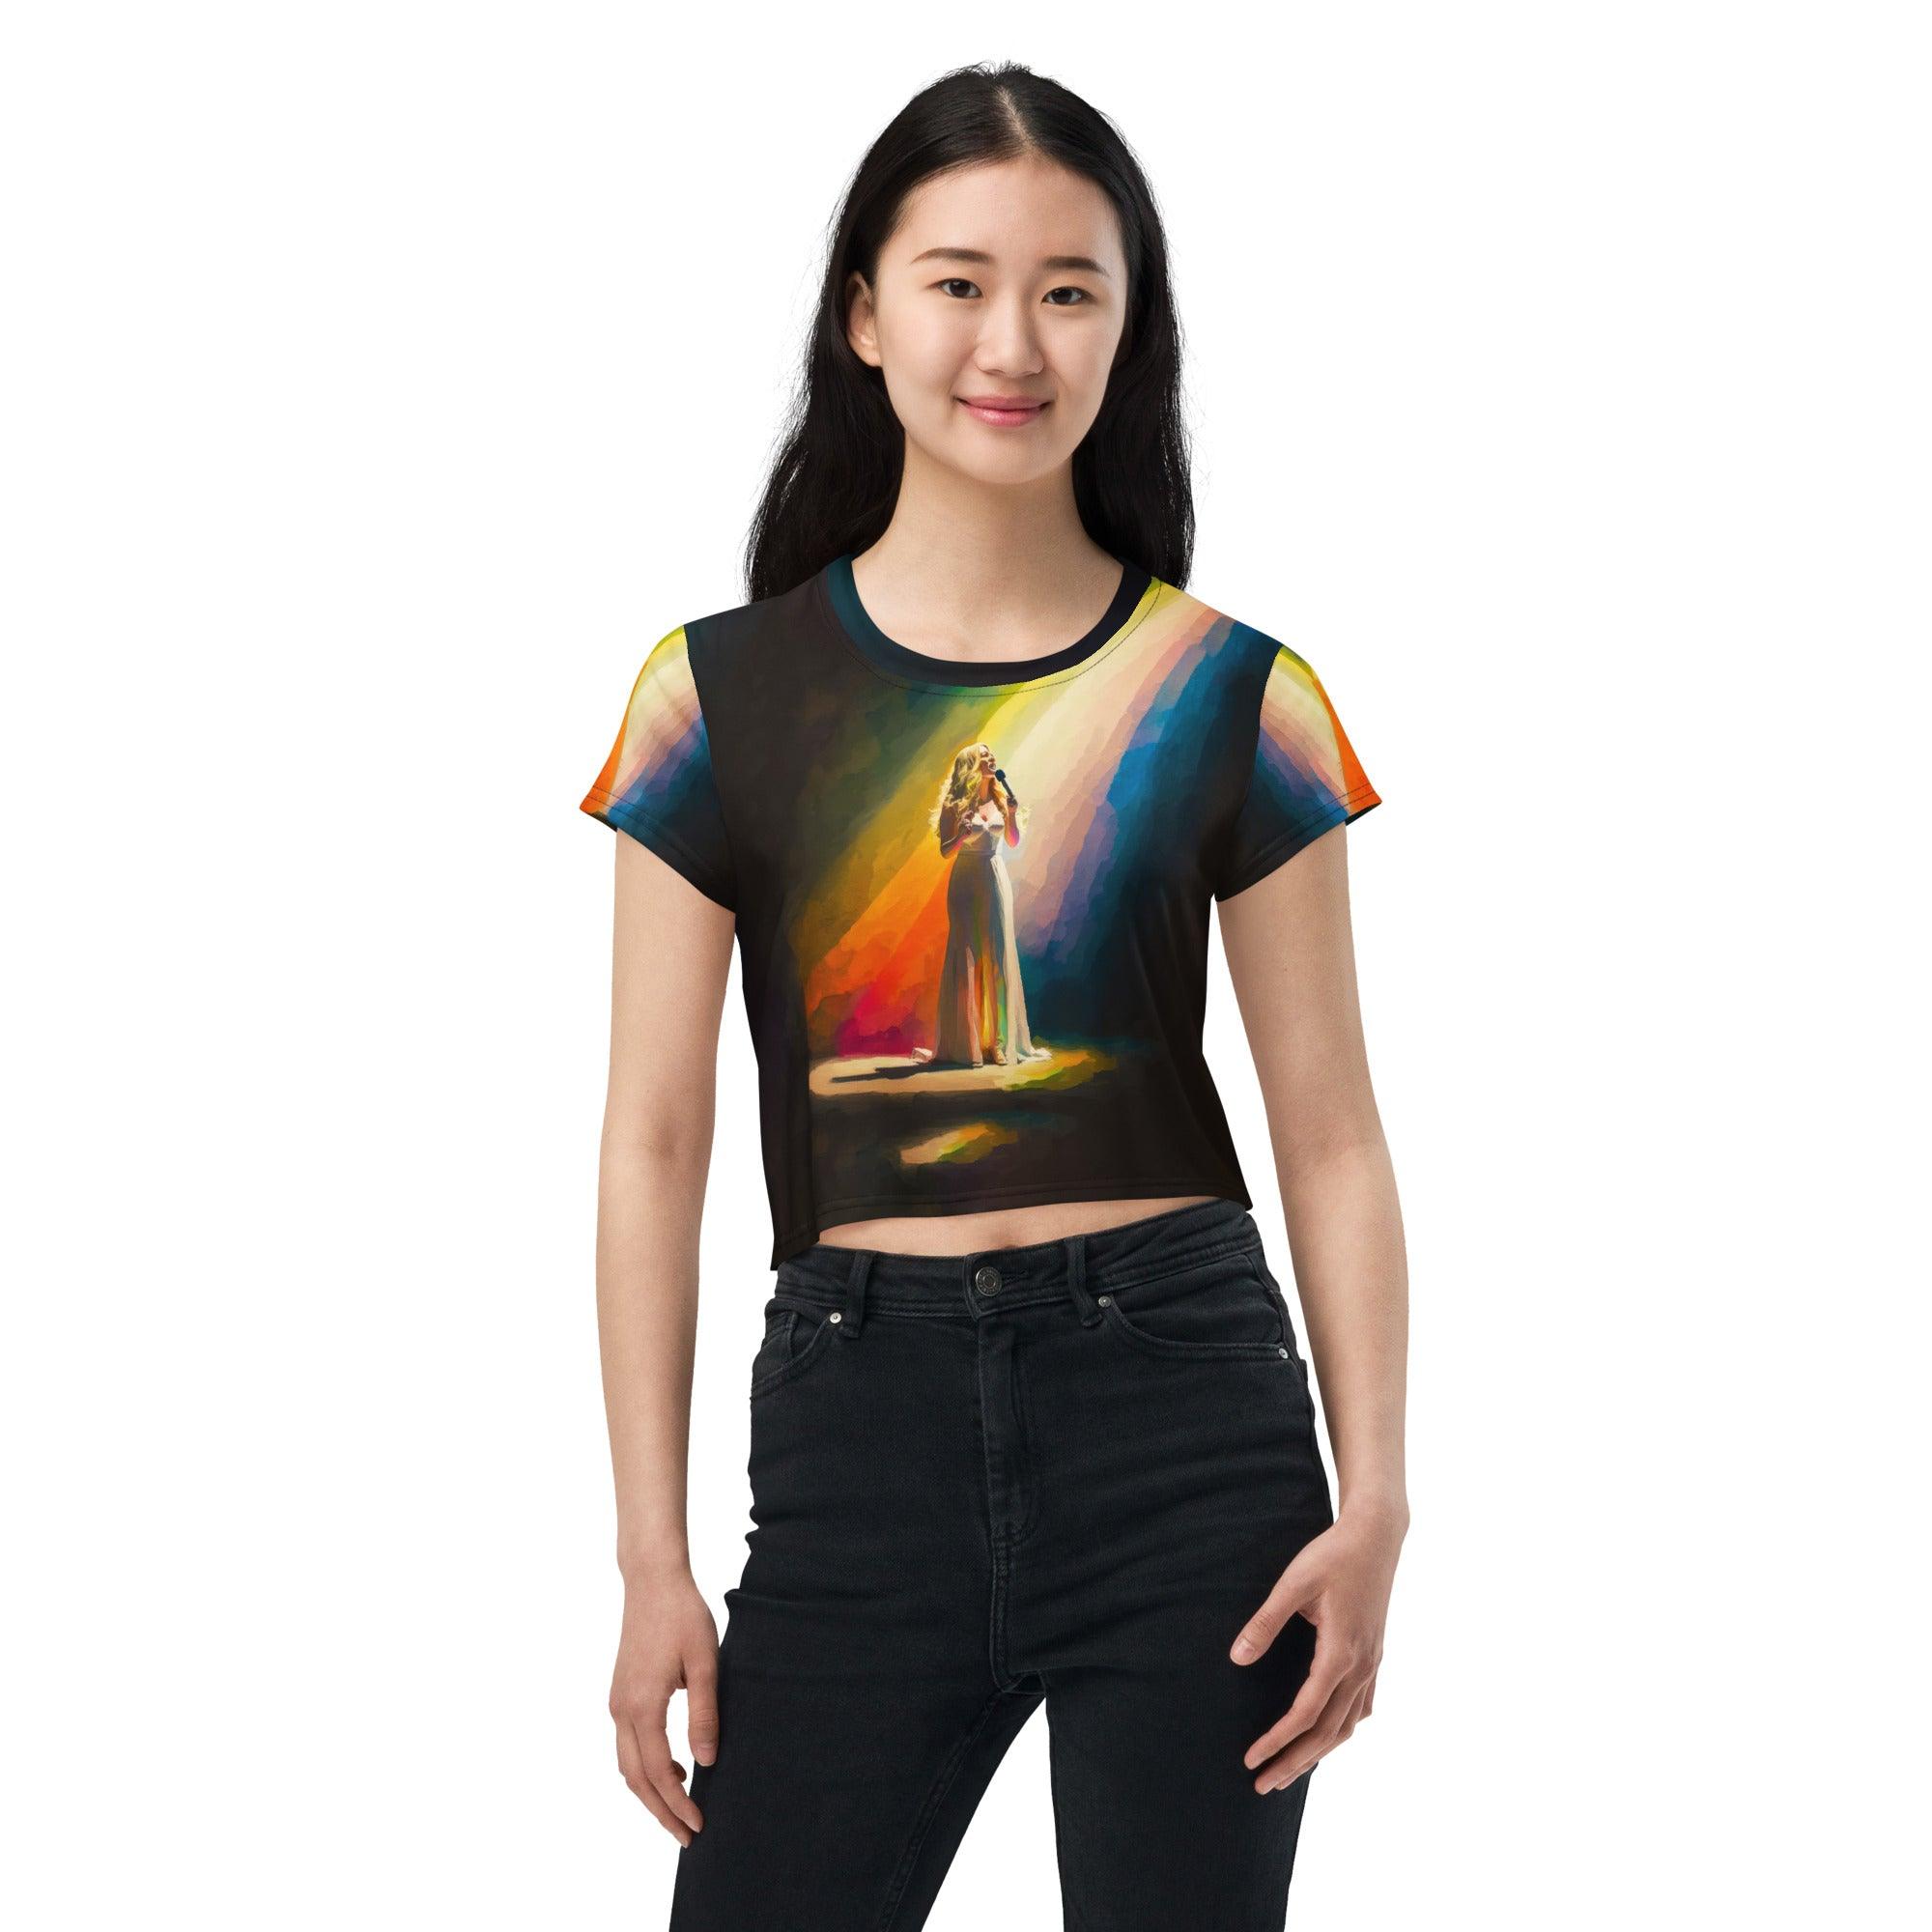 SurArt 69 printed crop tee styled with jeans.